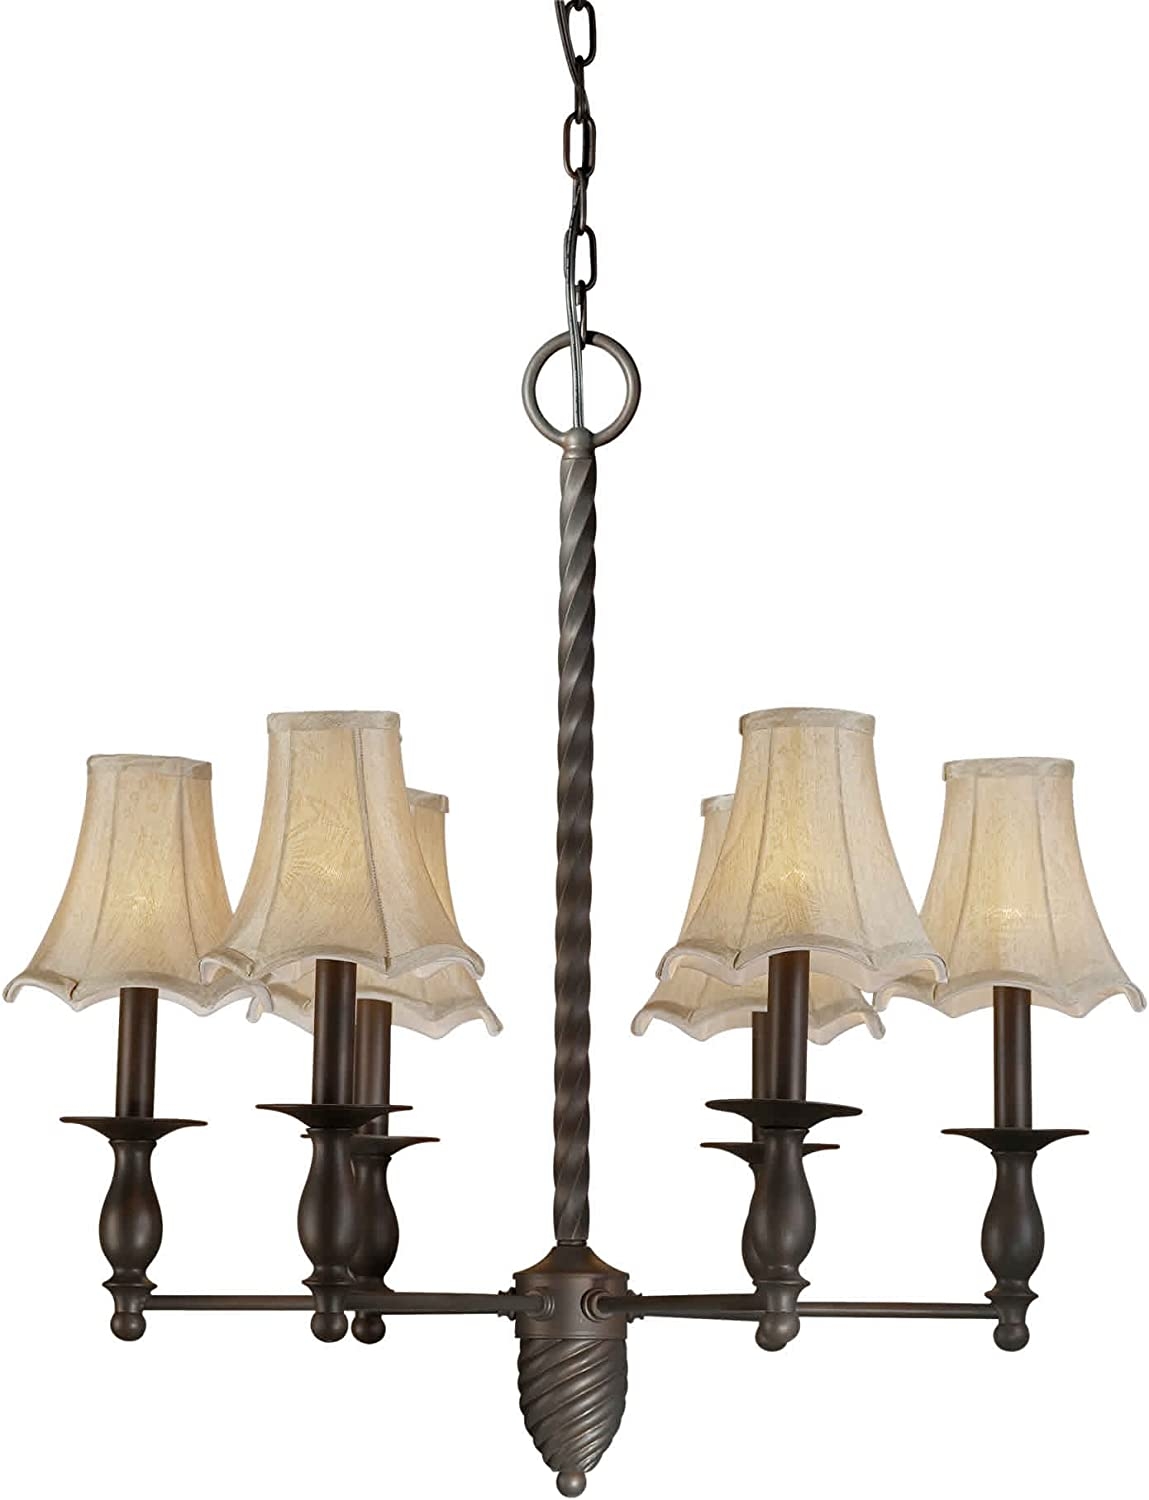 6 Light Chandelier with Fabric Shades